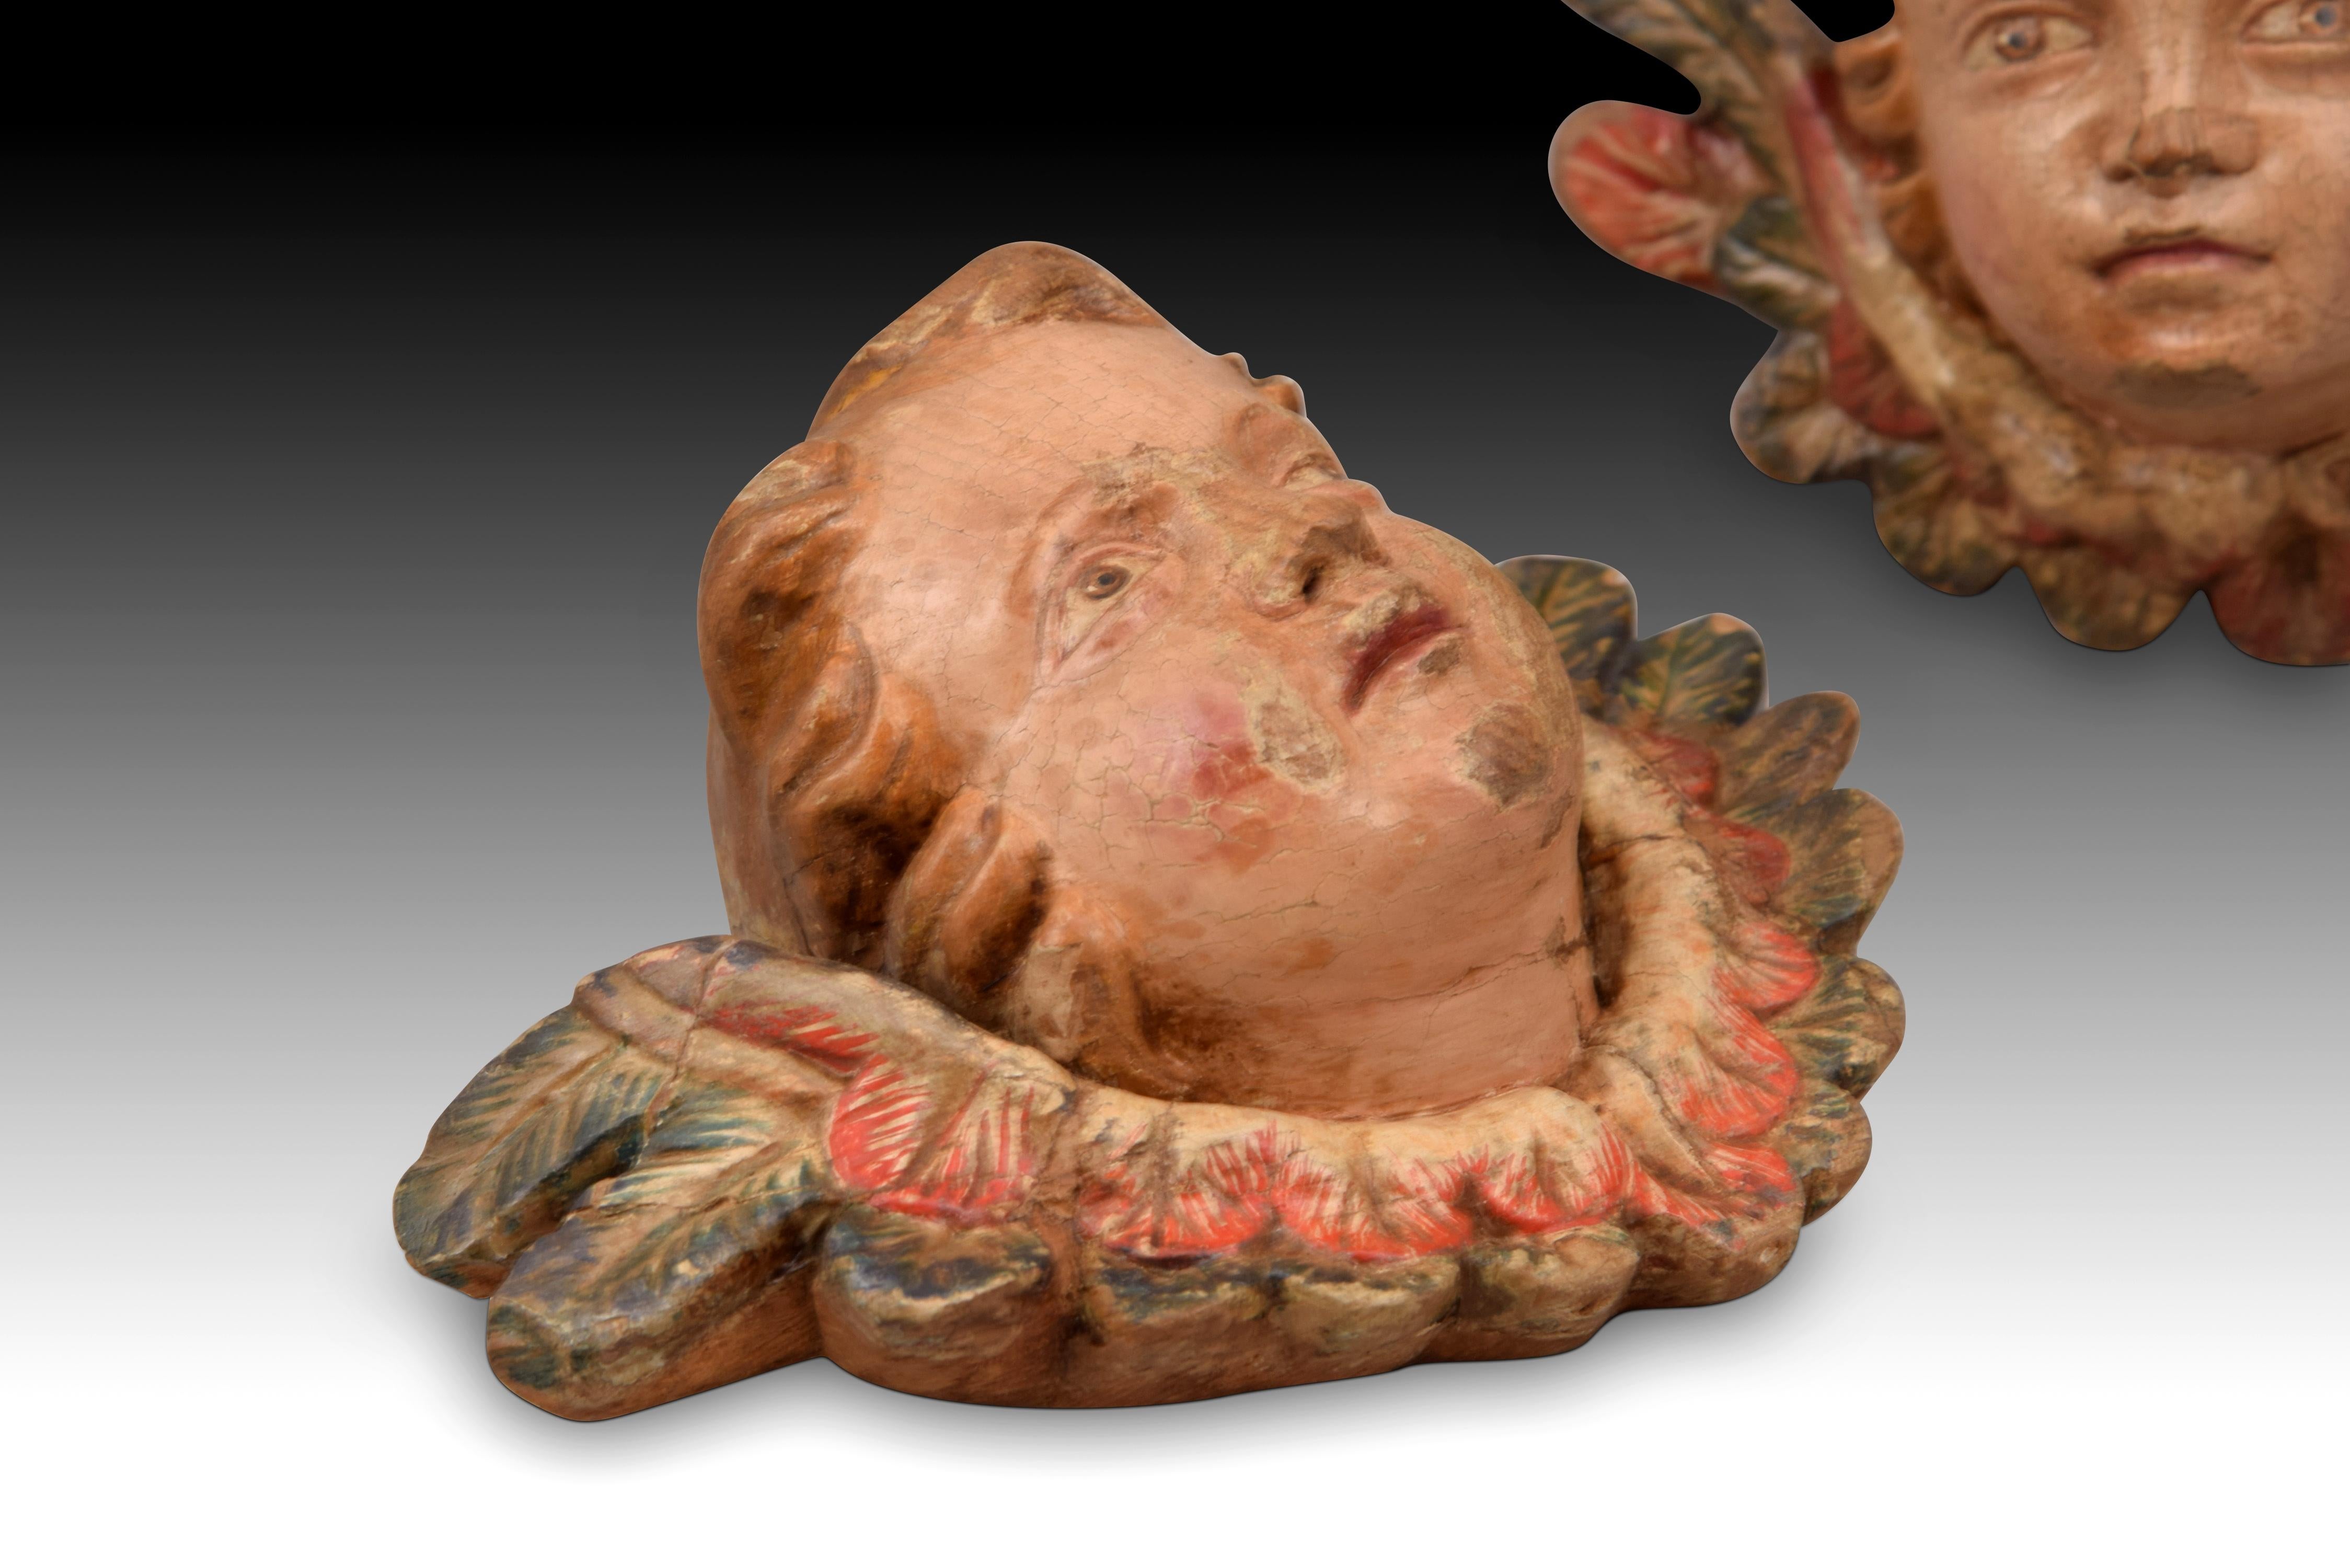 18th Century and Earlier Pair of Angel Heads, Carved and Polychrome Wood, Spanish School, 18th Century